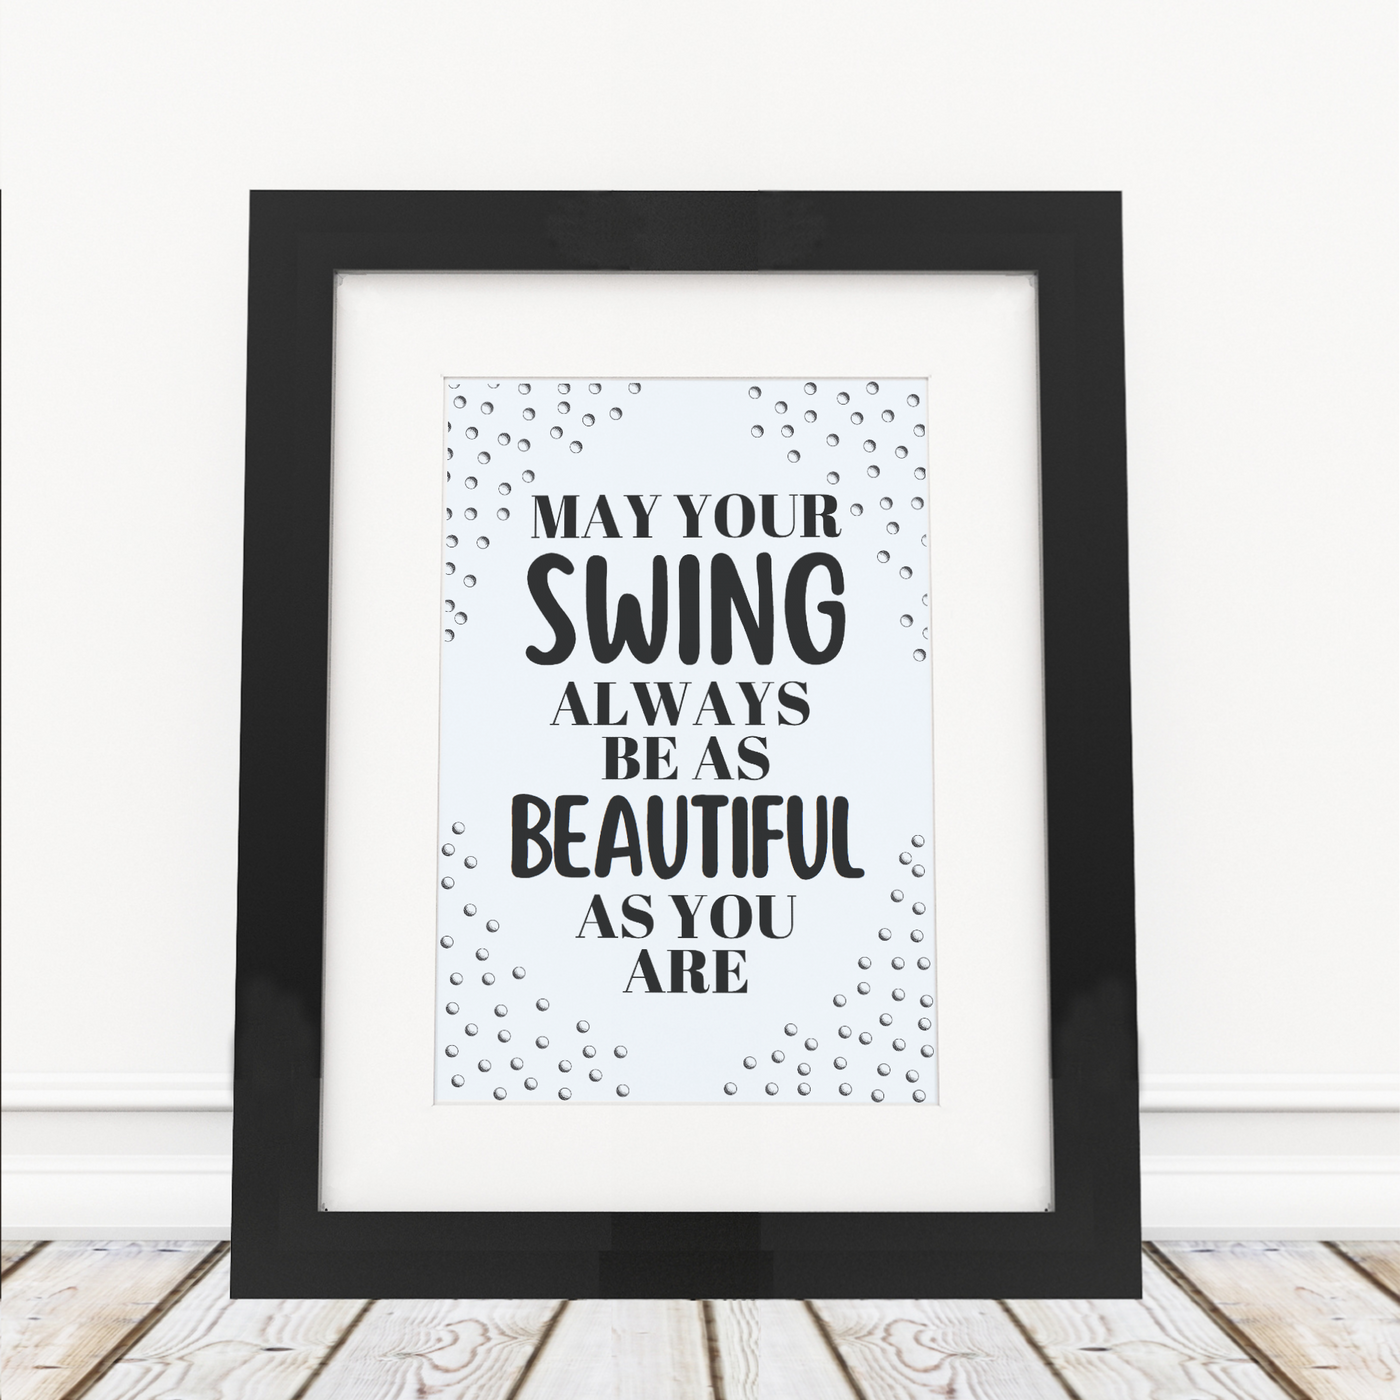 OUTLET - May Your Swing - Framed Print